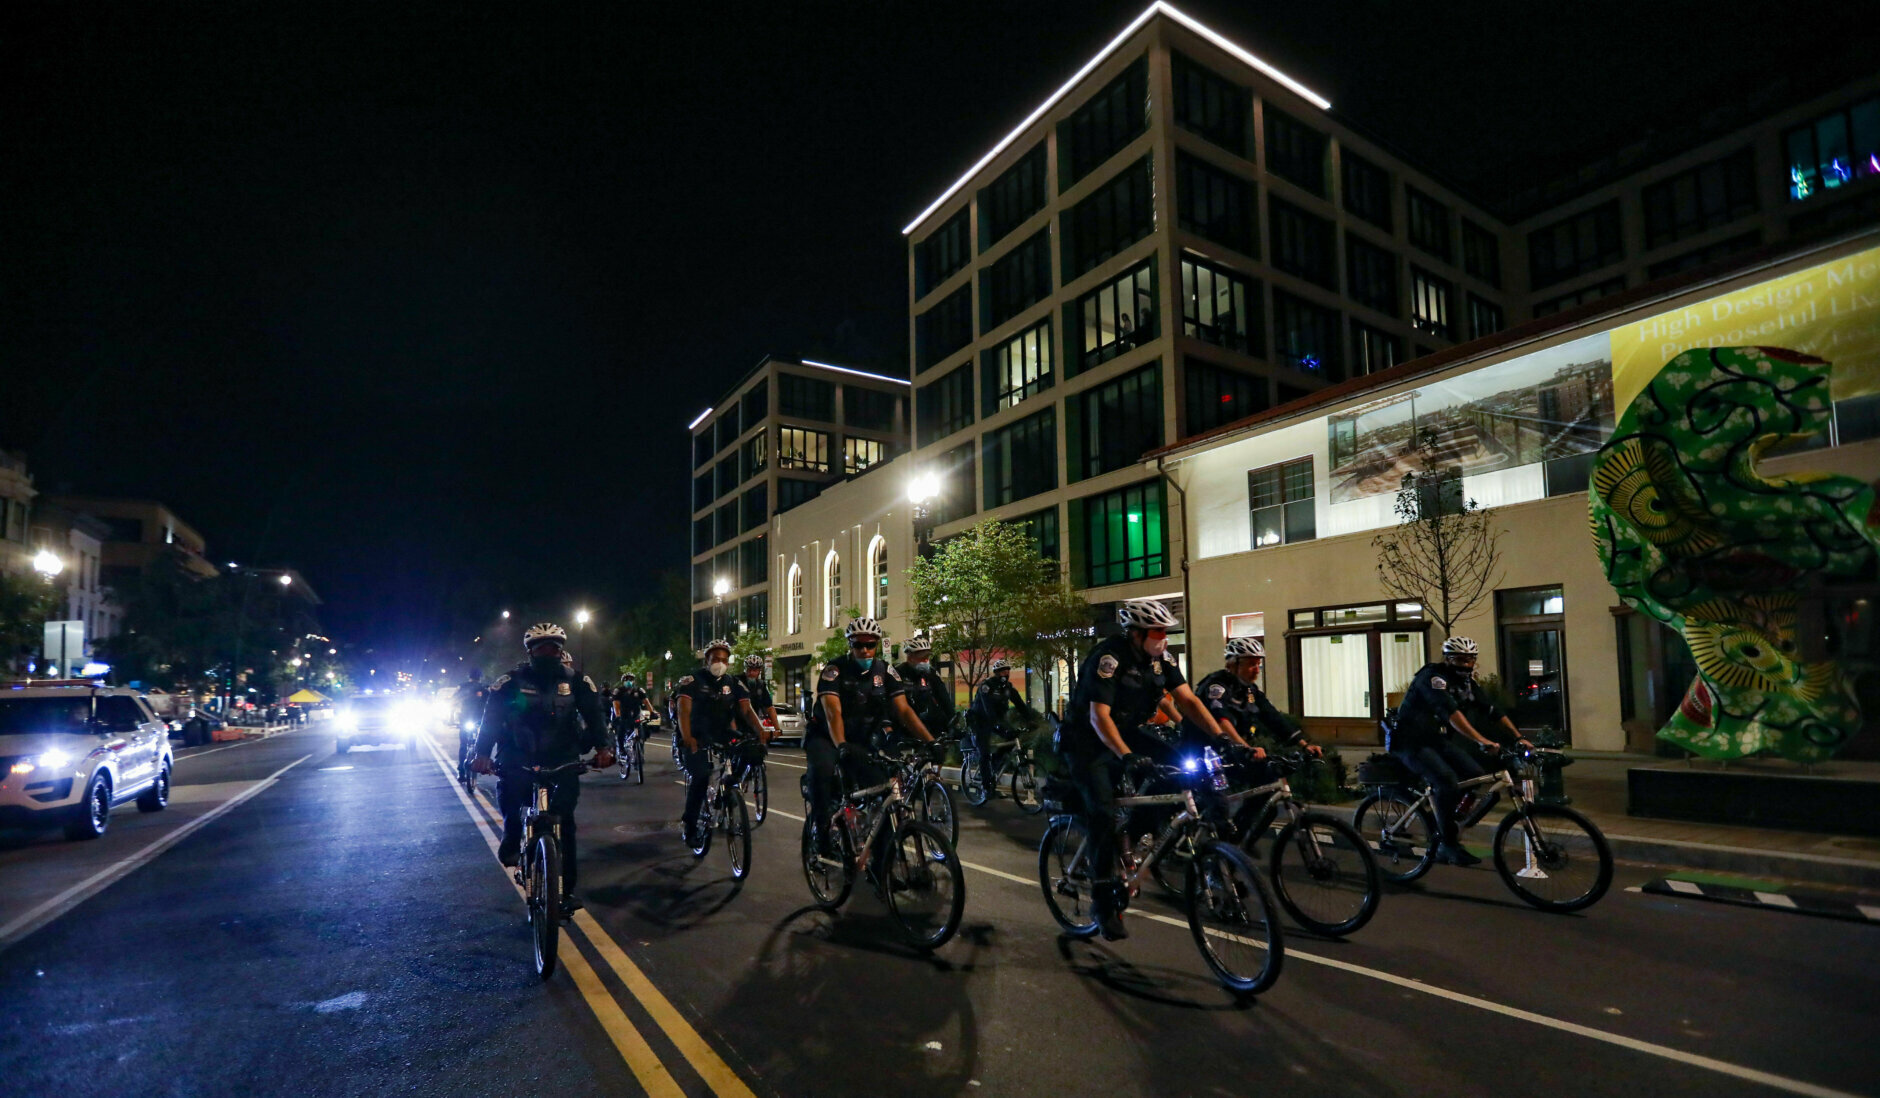 WASHINGTON, UNITED STATES - SEPTEMBER 24: Police officers take security measures as Demonstrators march in Washington D.C. protest following a Kentucky grand jury decision in the Breonna Taylor case on September 24, 2020 in Washington, DC (Photo by Yasin Ozturk/Anadolu Agency via Getty Images)